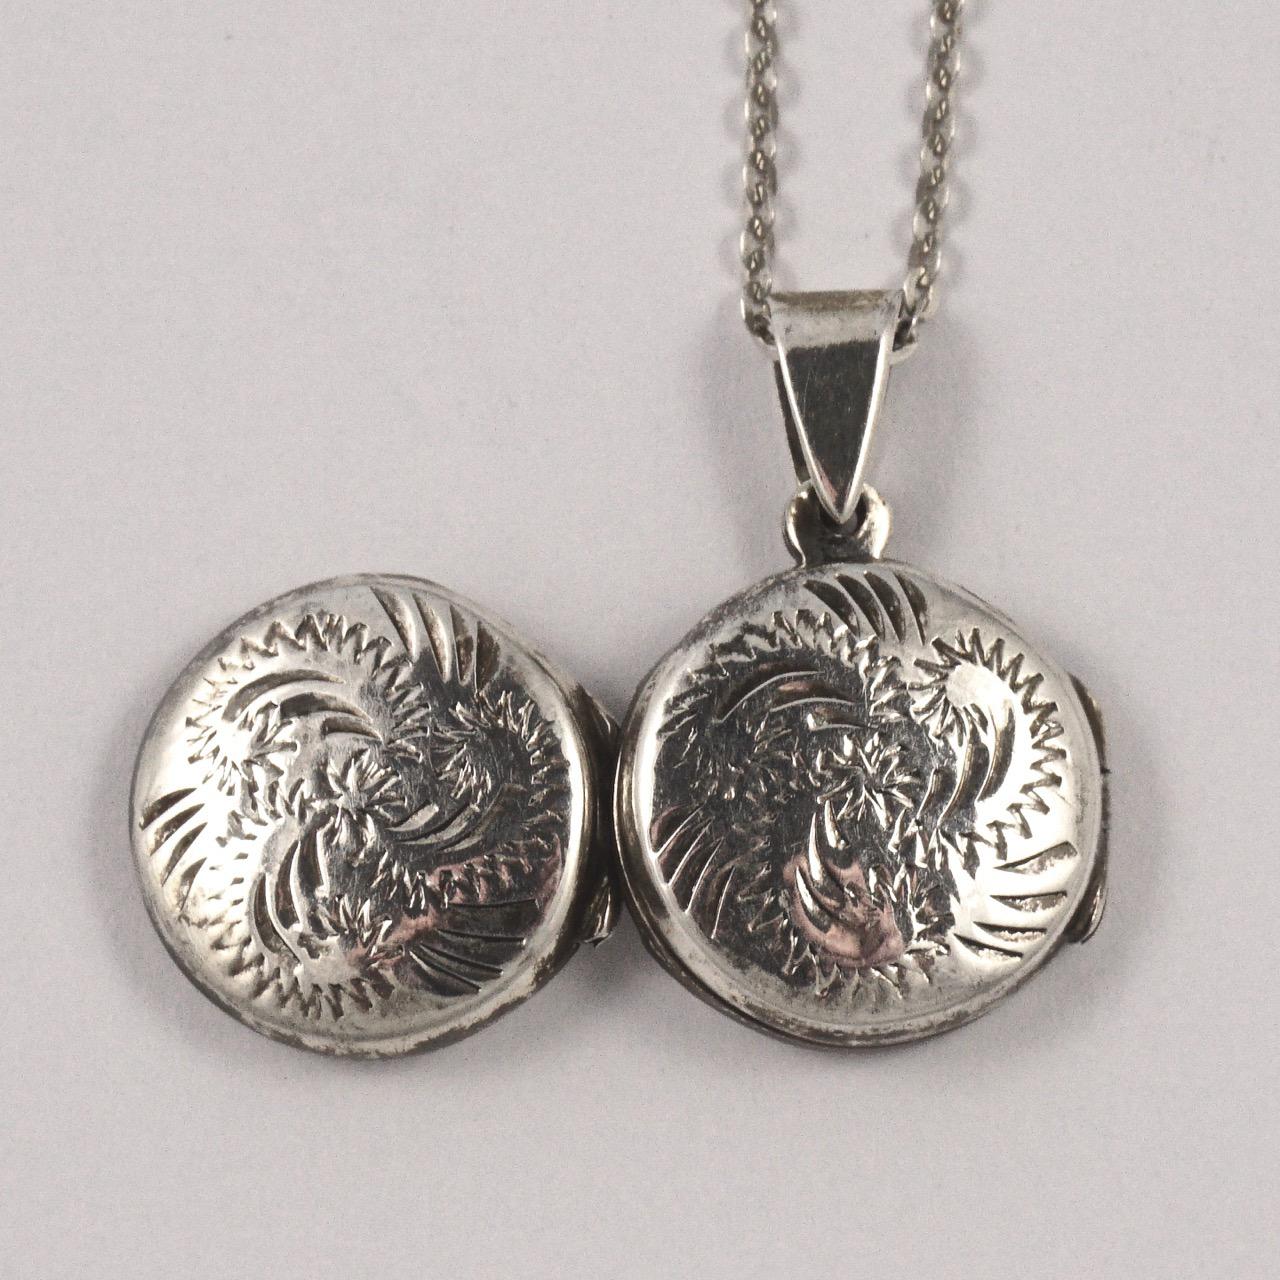 Sterling silver double locket and chain, featuring a lovely engraved abstract leaves design to both sides. The locket measures diameter 1.4cm / .55 inches. There is some scratching as expected. The hinge works well, and the locket closes tightly.